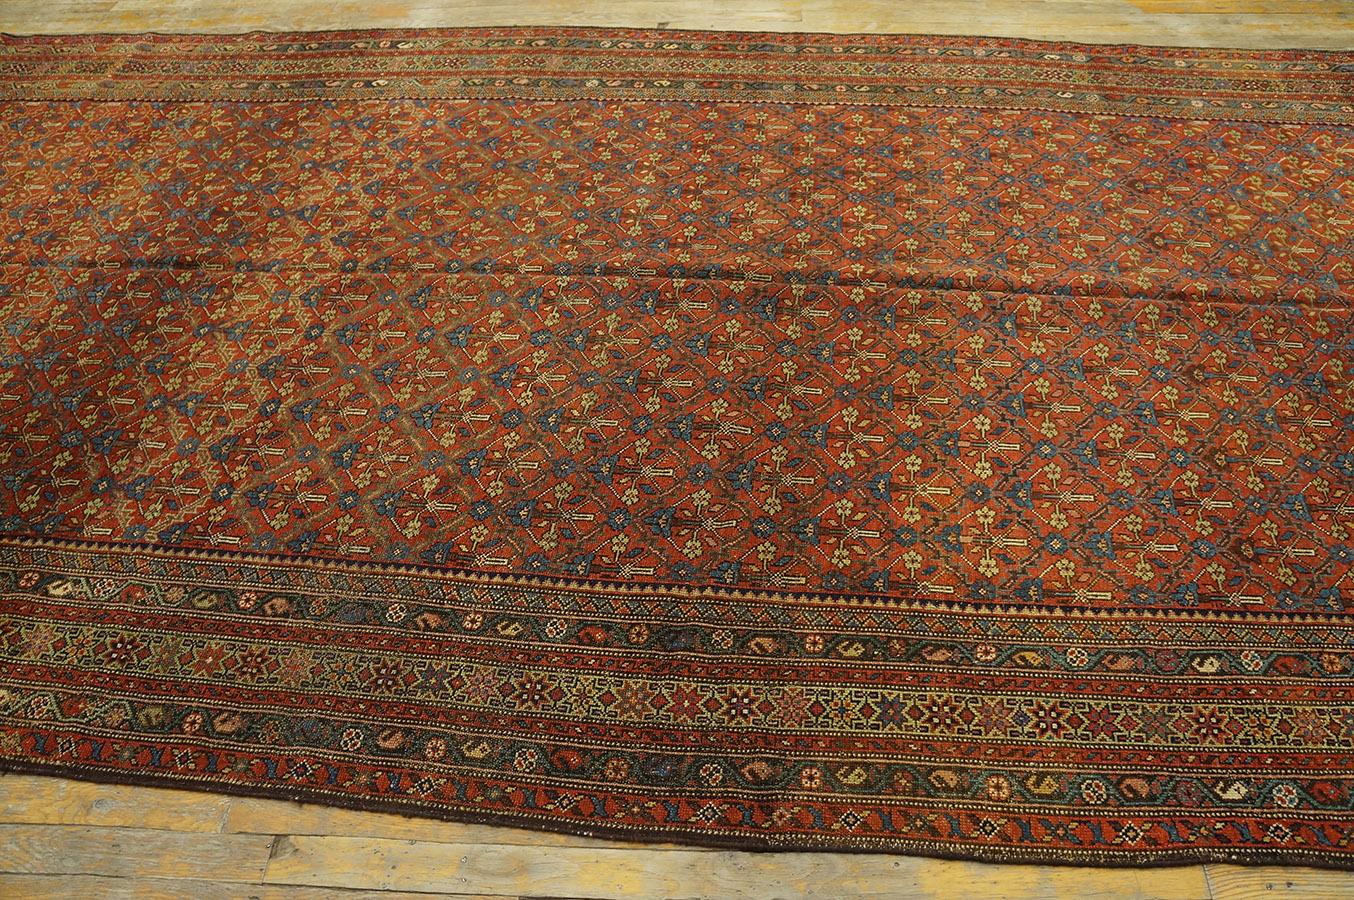 Early 20th Century N.W. Persian Gallery Carpet ( 6' x 13' - 183 x 396 ) For Sale 1